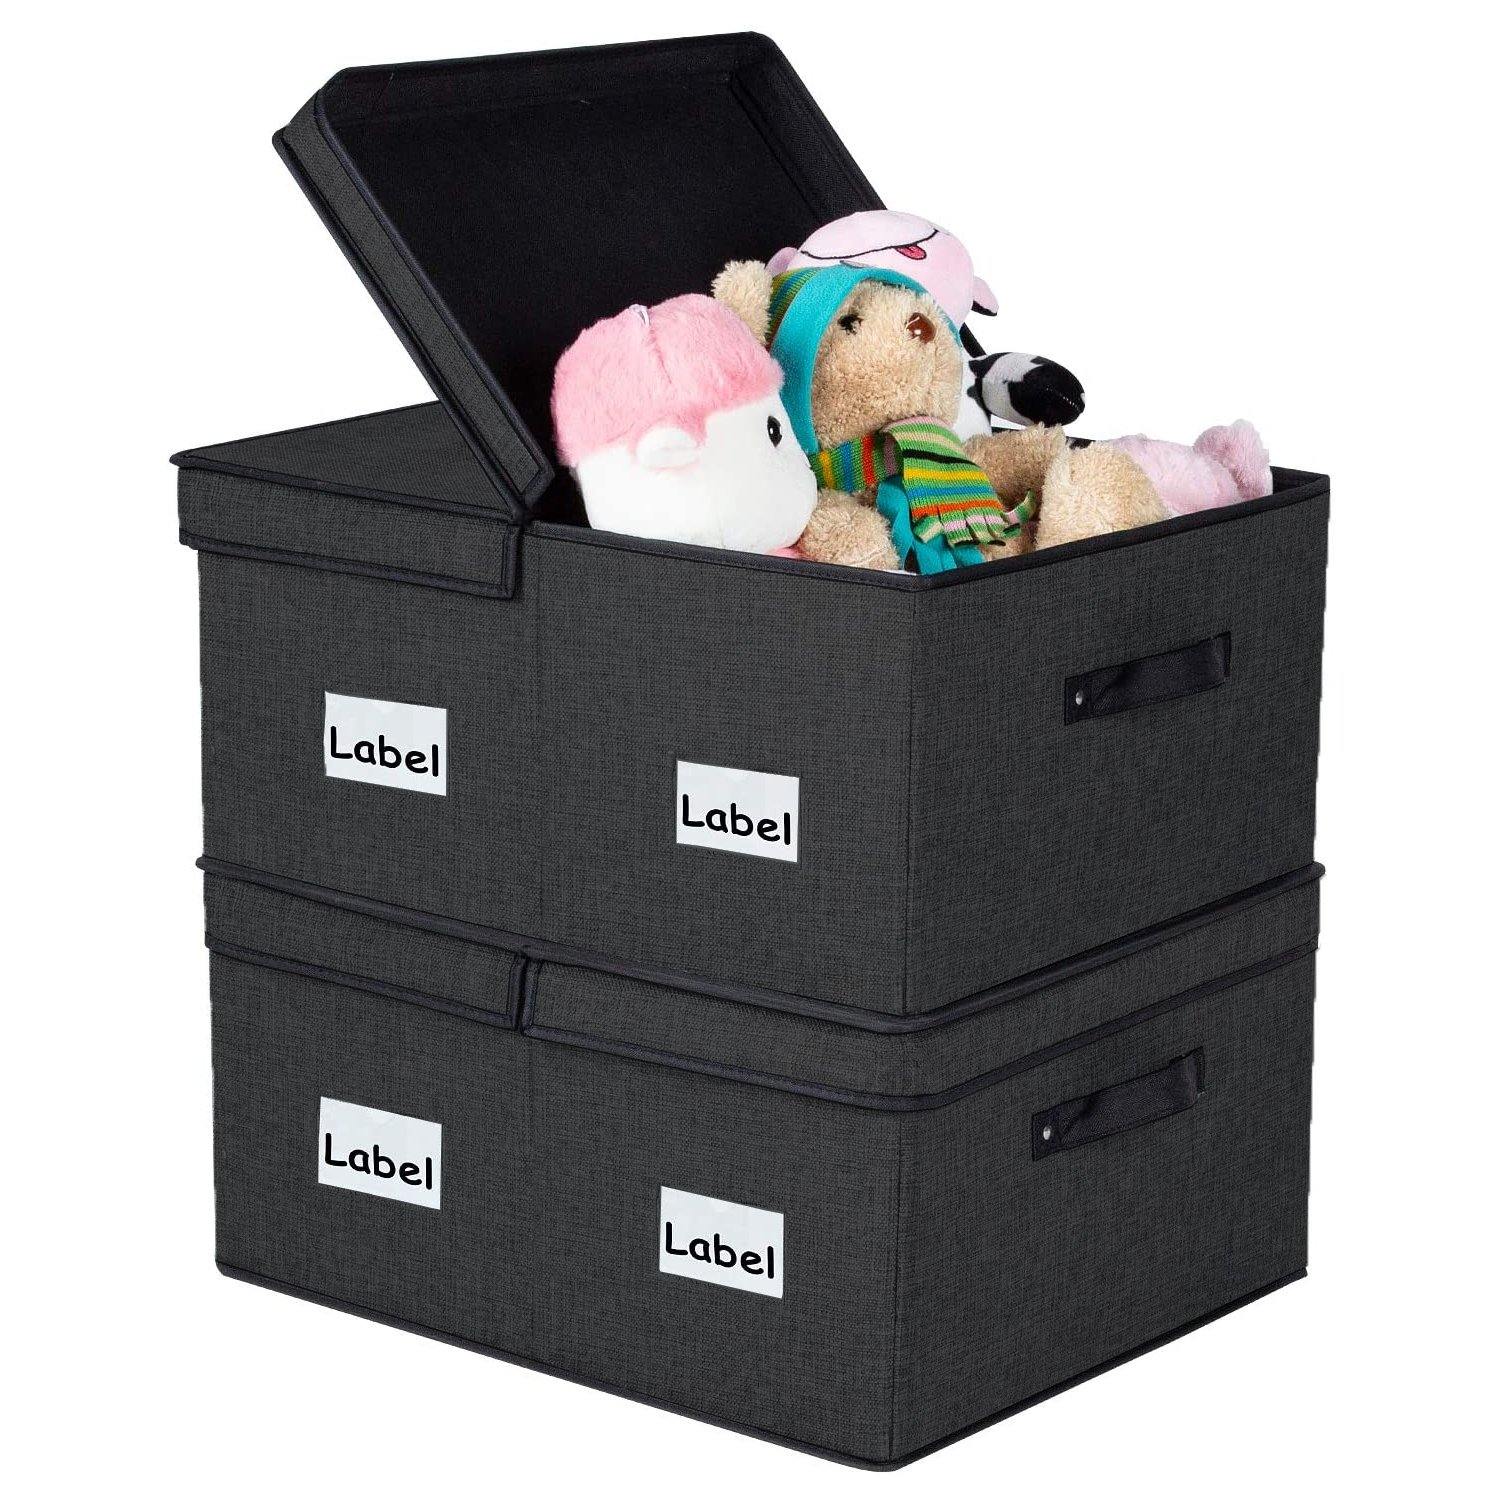 Decorative Fabric Storage Boxes with Lid